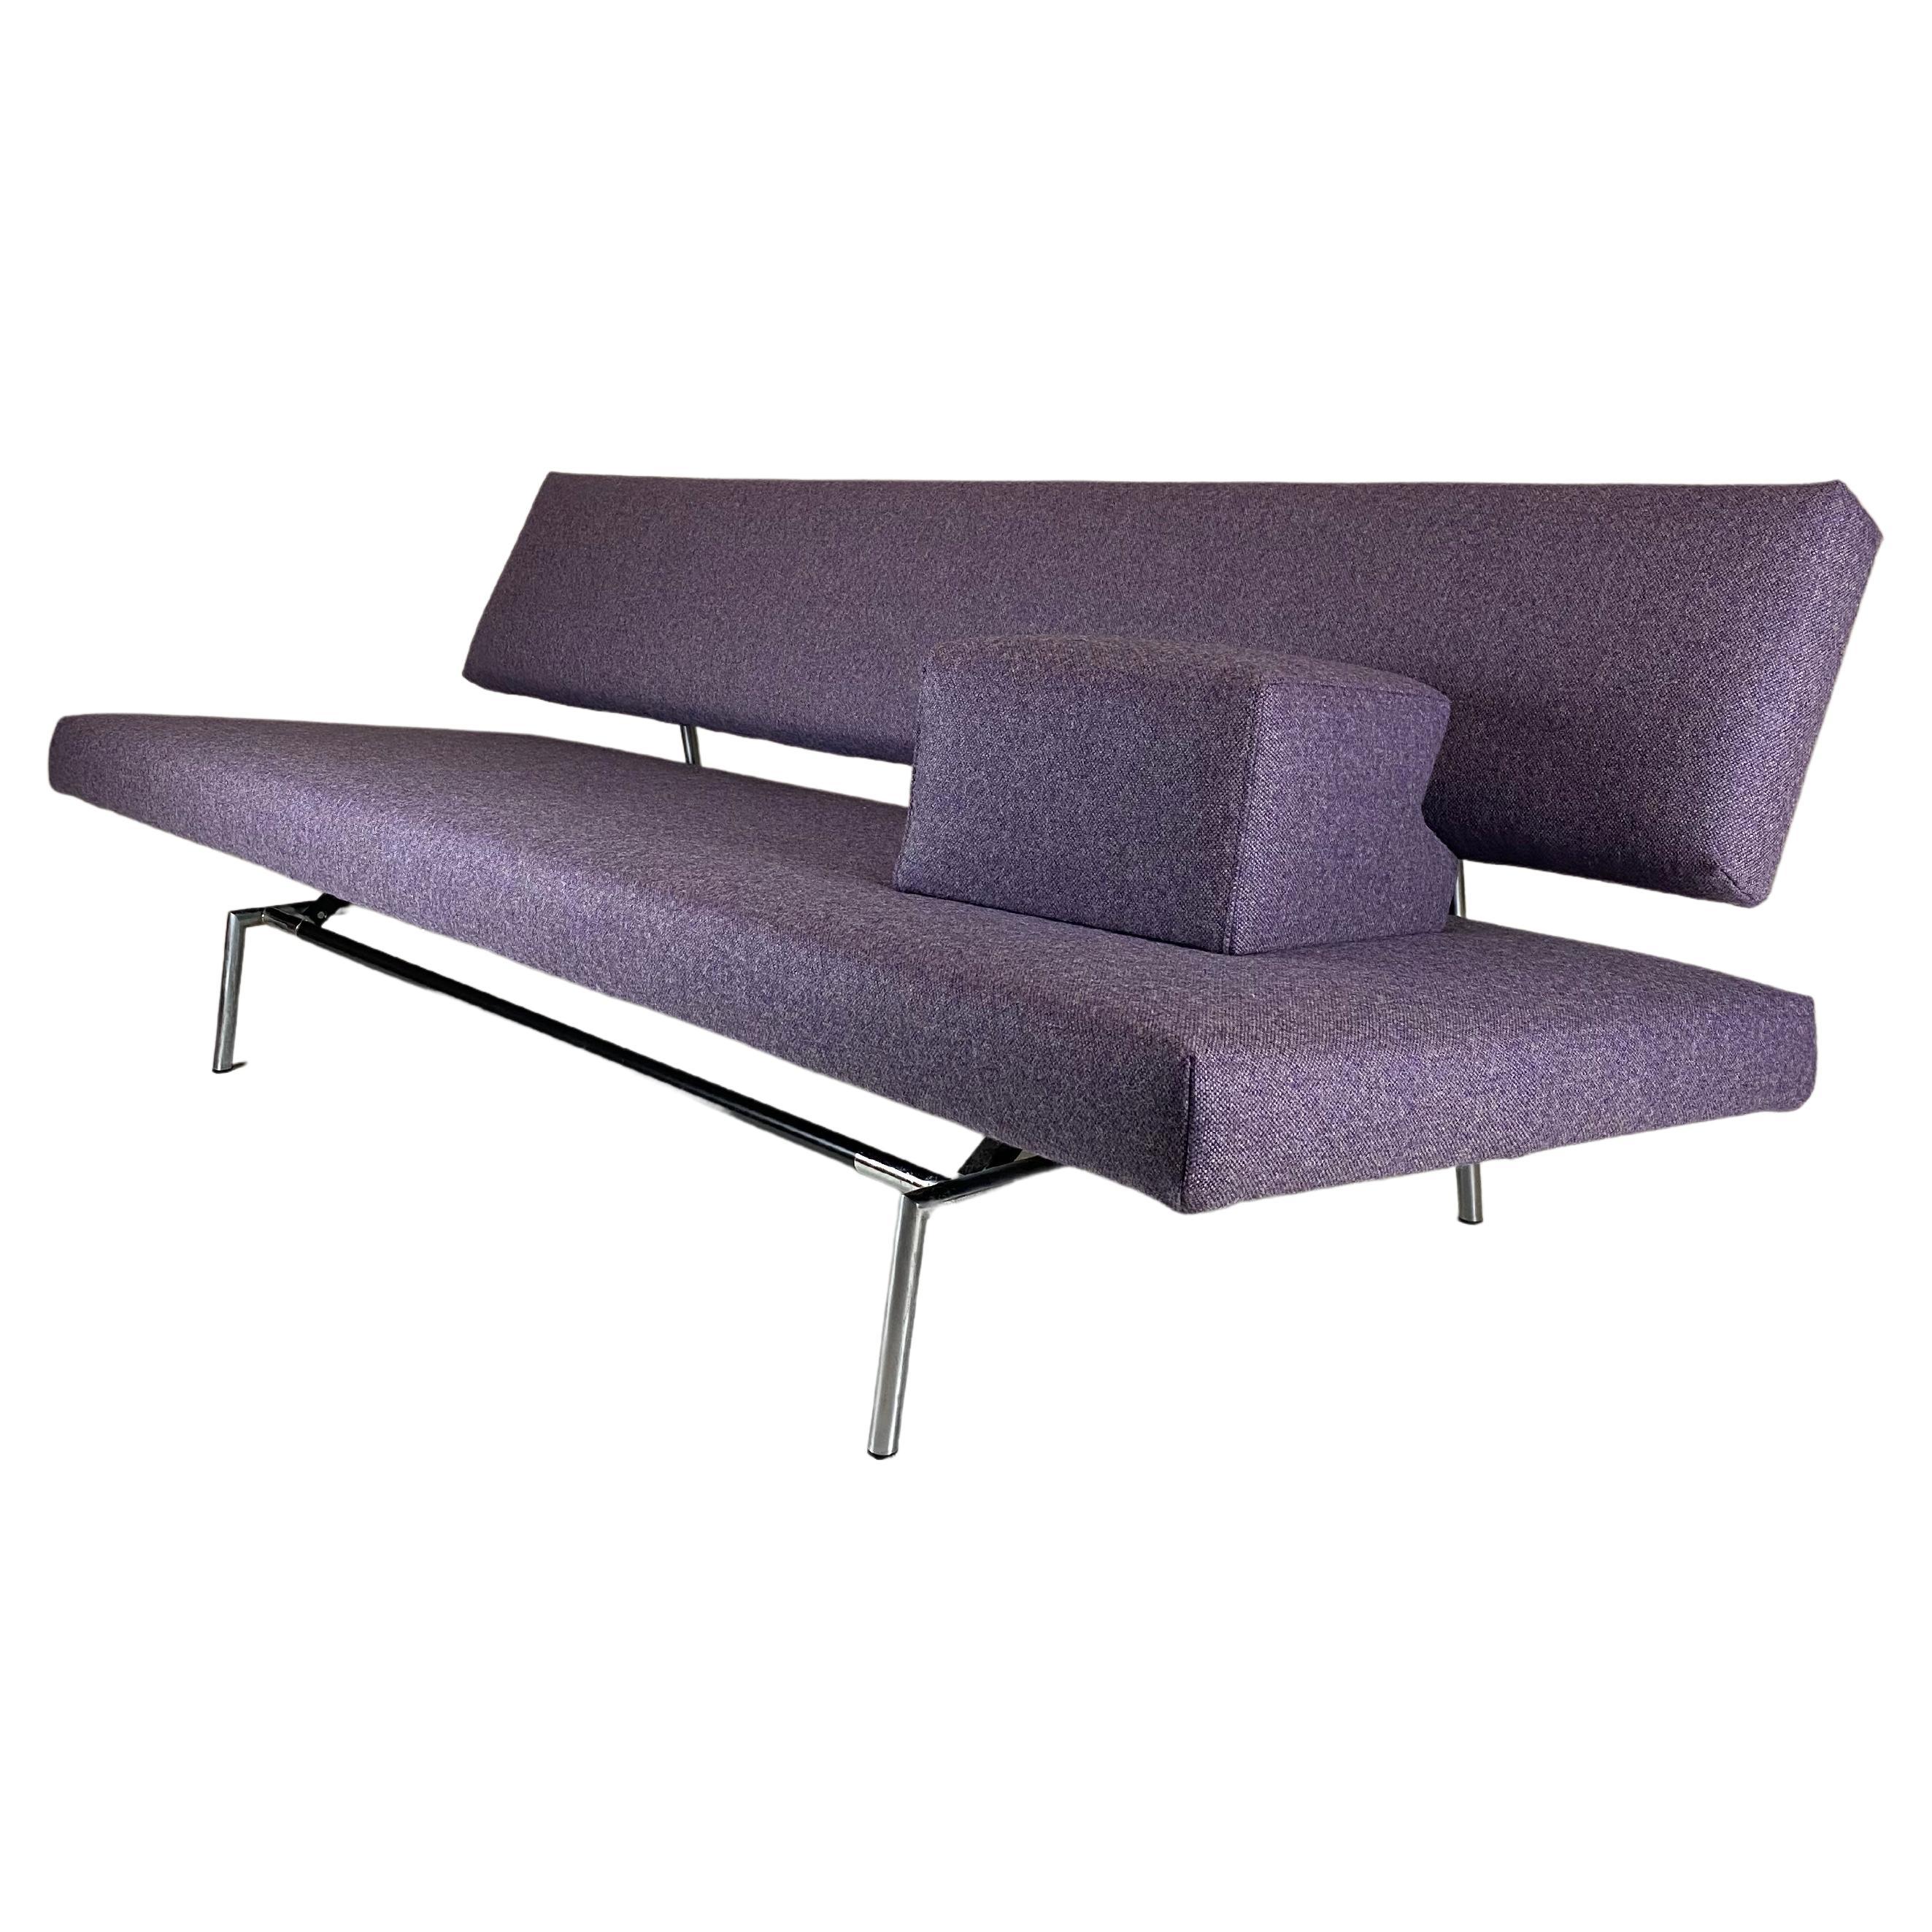 Martin Visser BR02 Sofa/ Sofa bed/ Daybed by ‘t Spectrum, Dutch Mid-Century For Sale